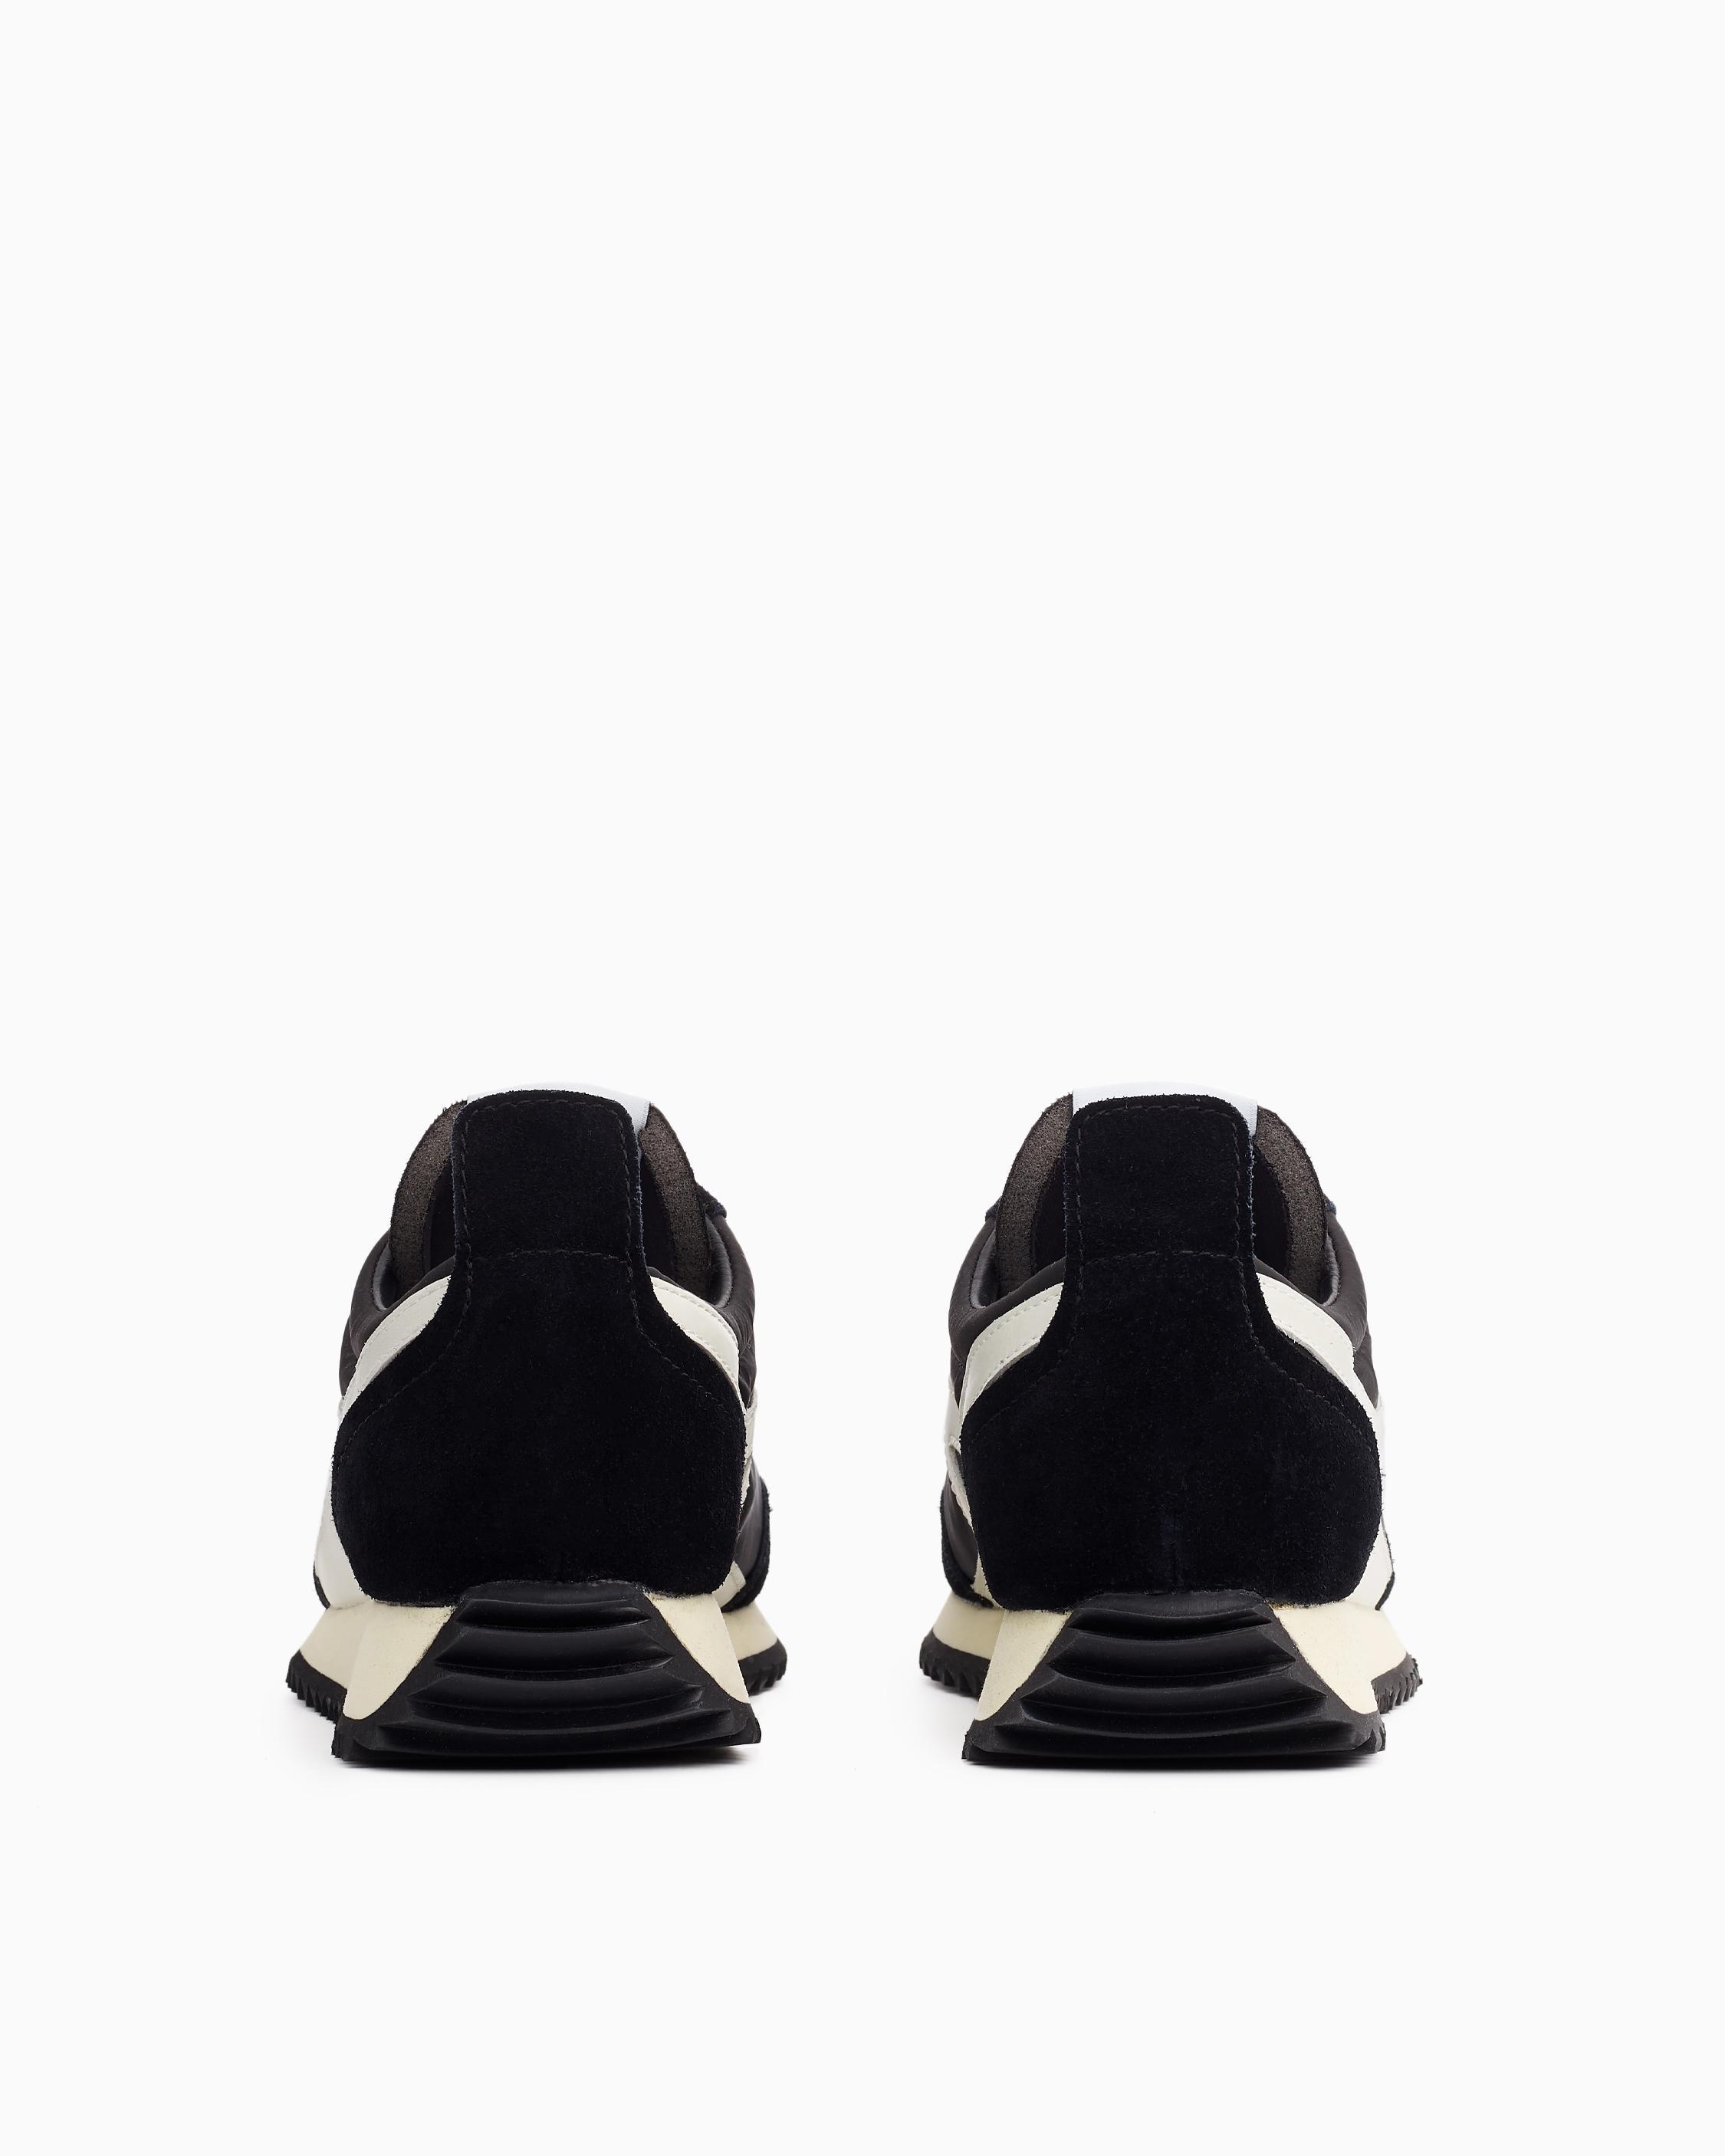 Rag & Bone Retro Runner Leather And Recycled Materials Sneaker in Black